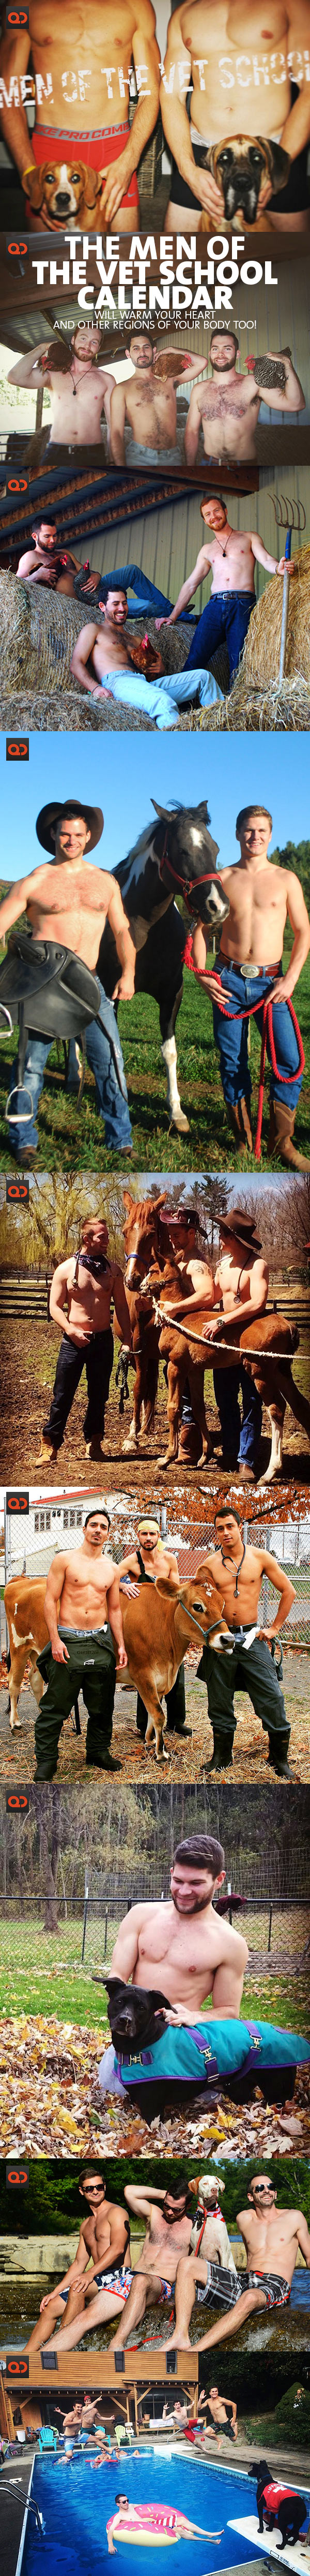 The Men Of The Vet School Calendar Will Warm Your Heart And Other Regions Of Your Body Too!